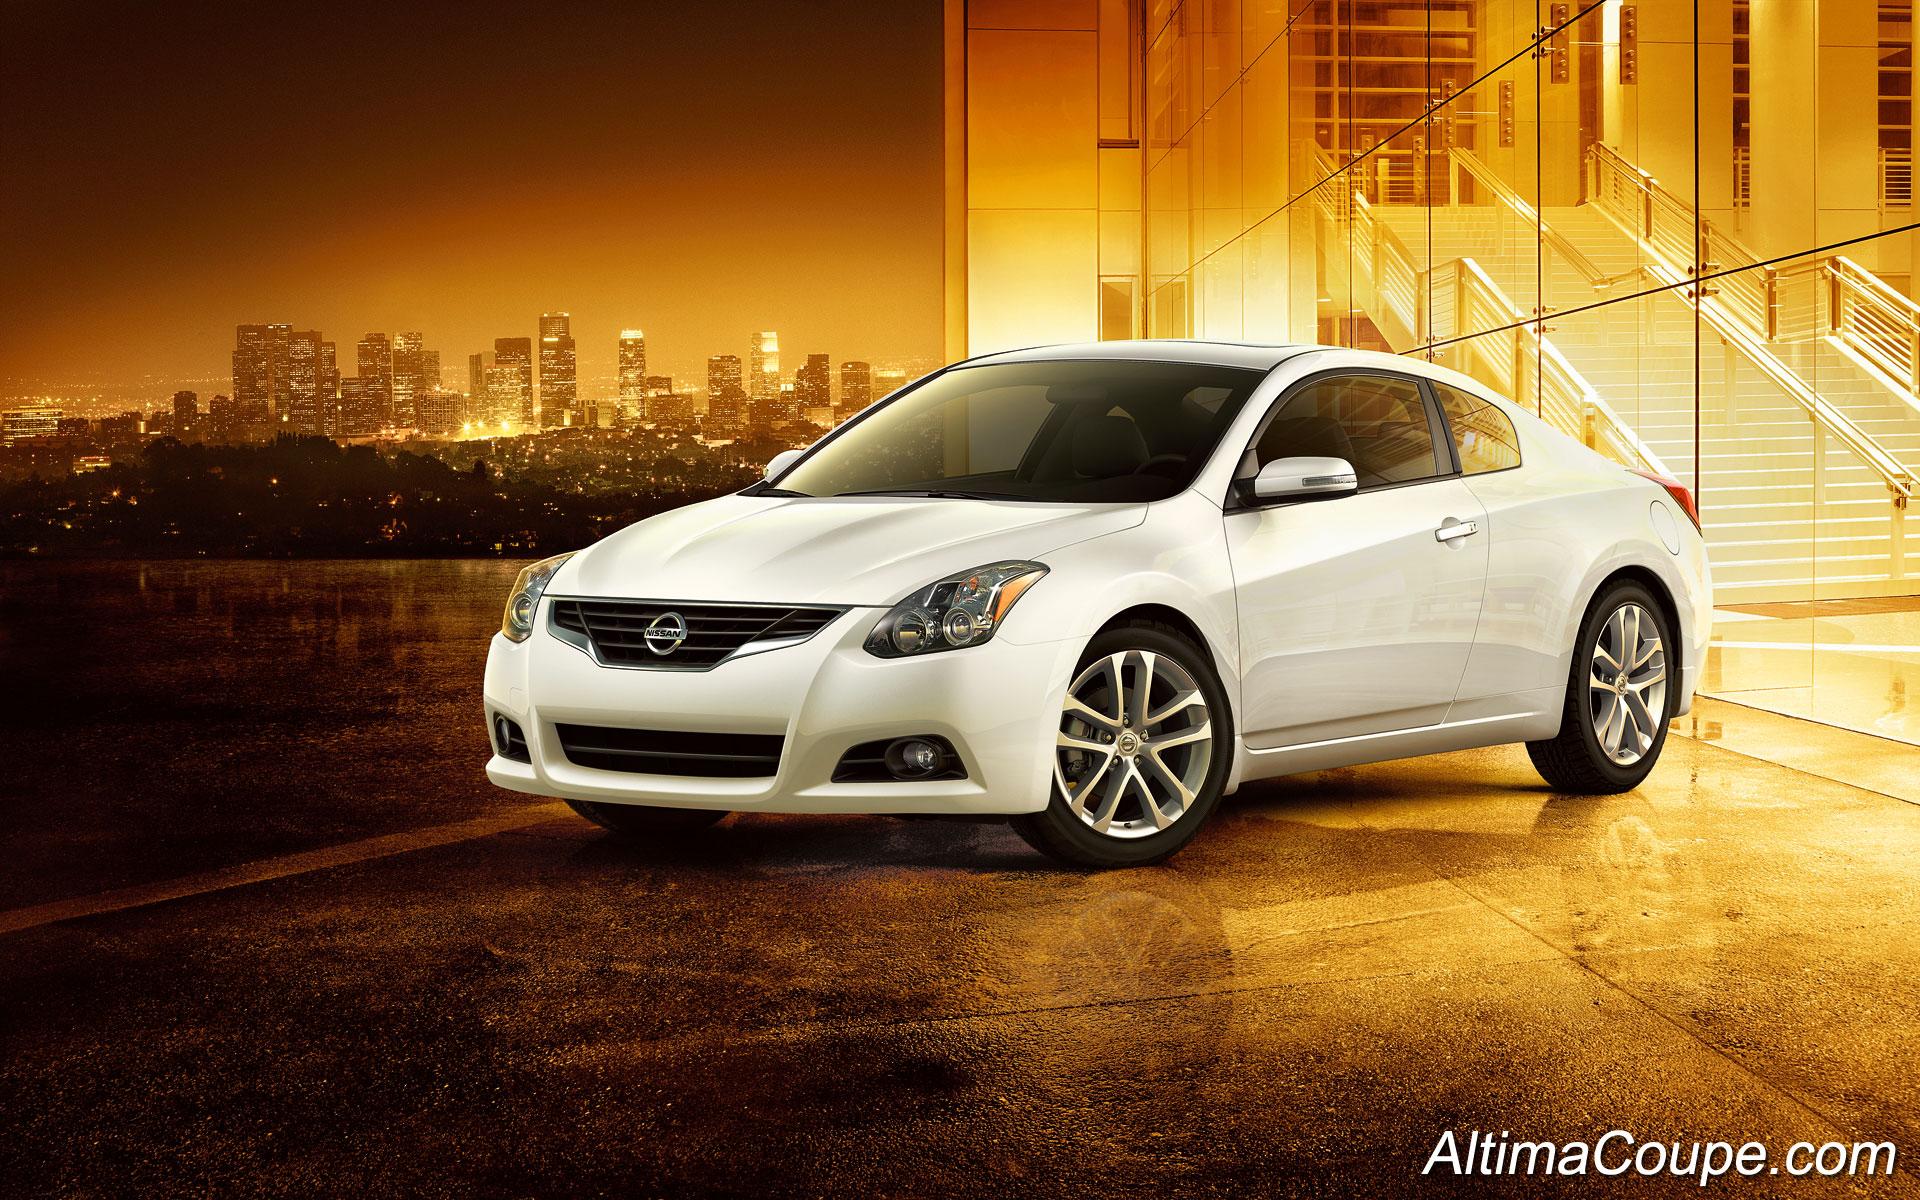 Nissan Altima Coupe Wallpaper. Nissan